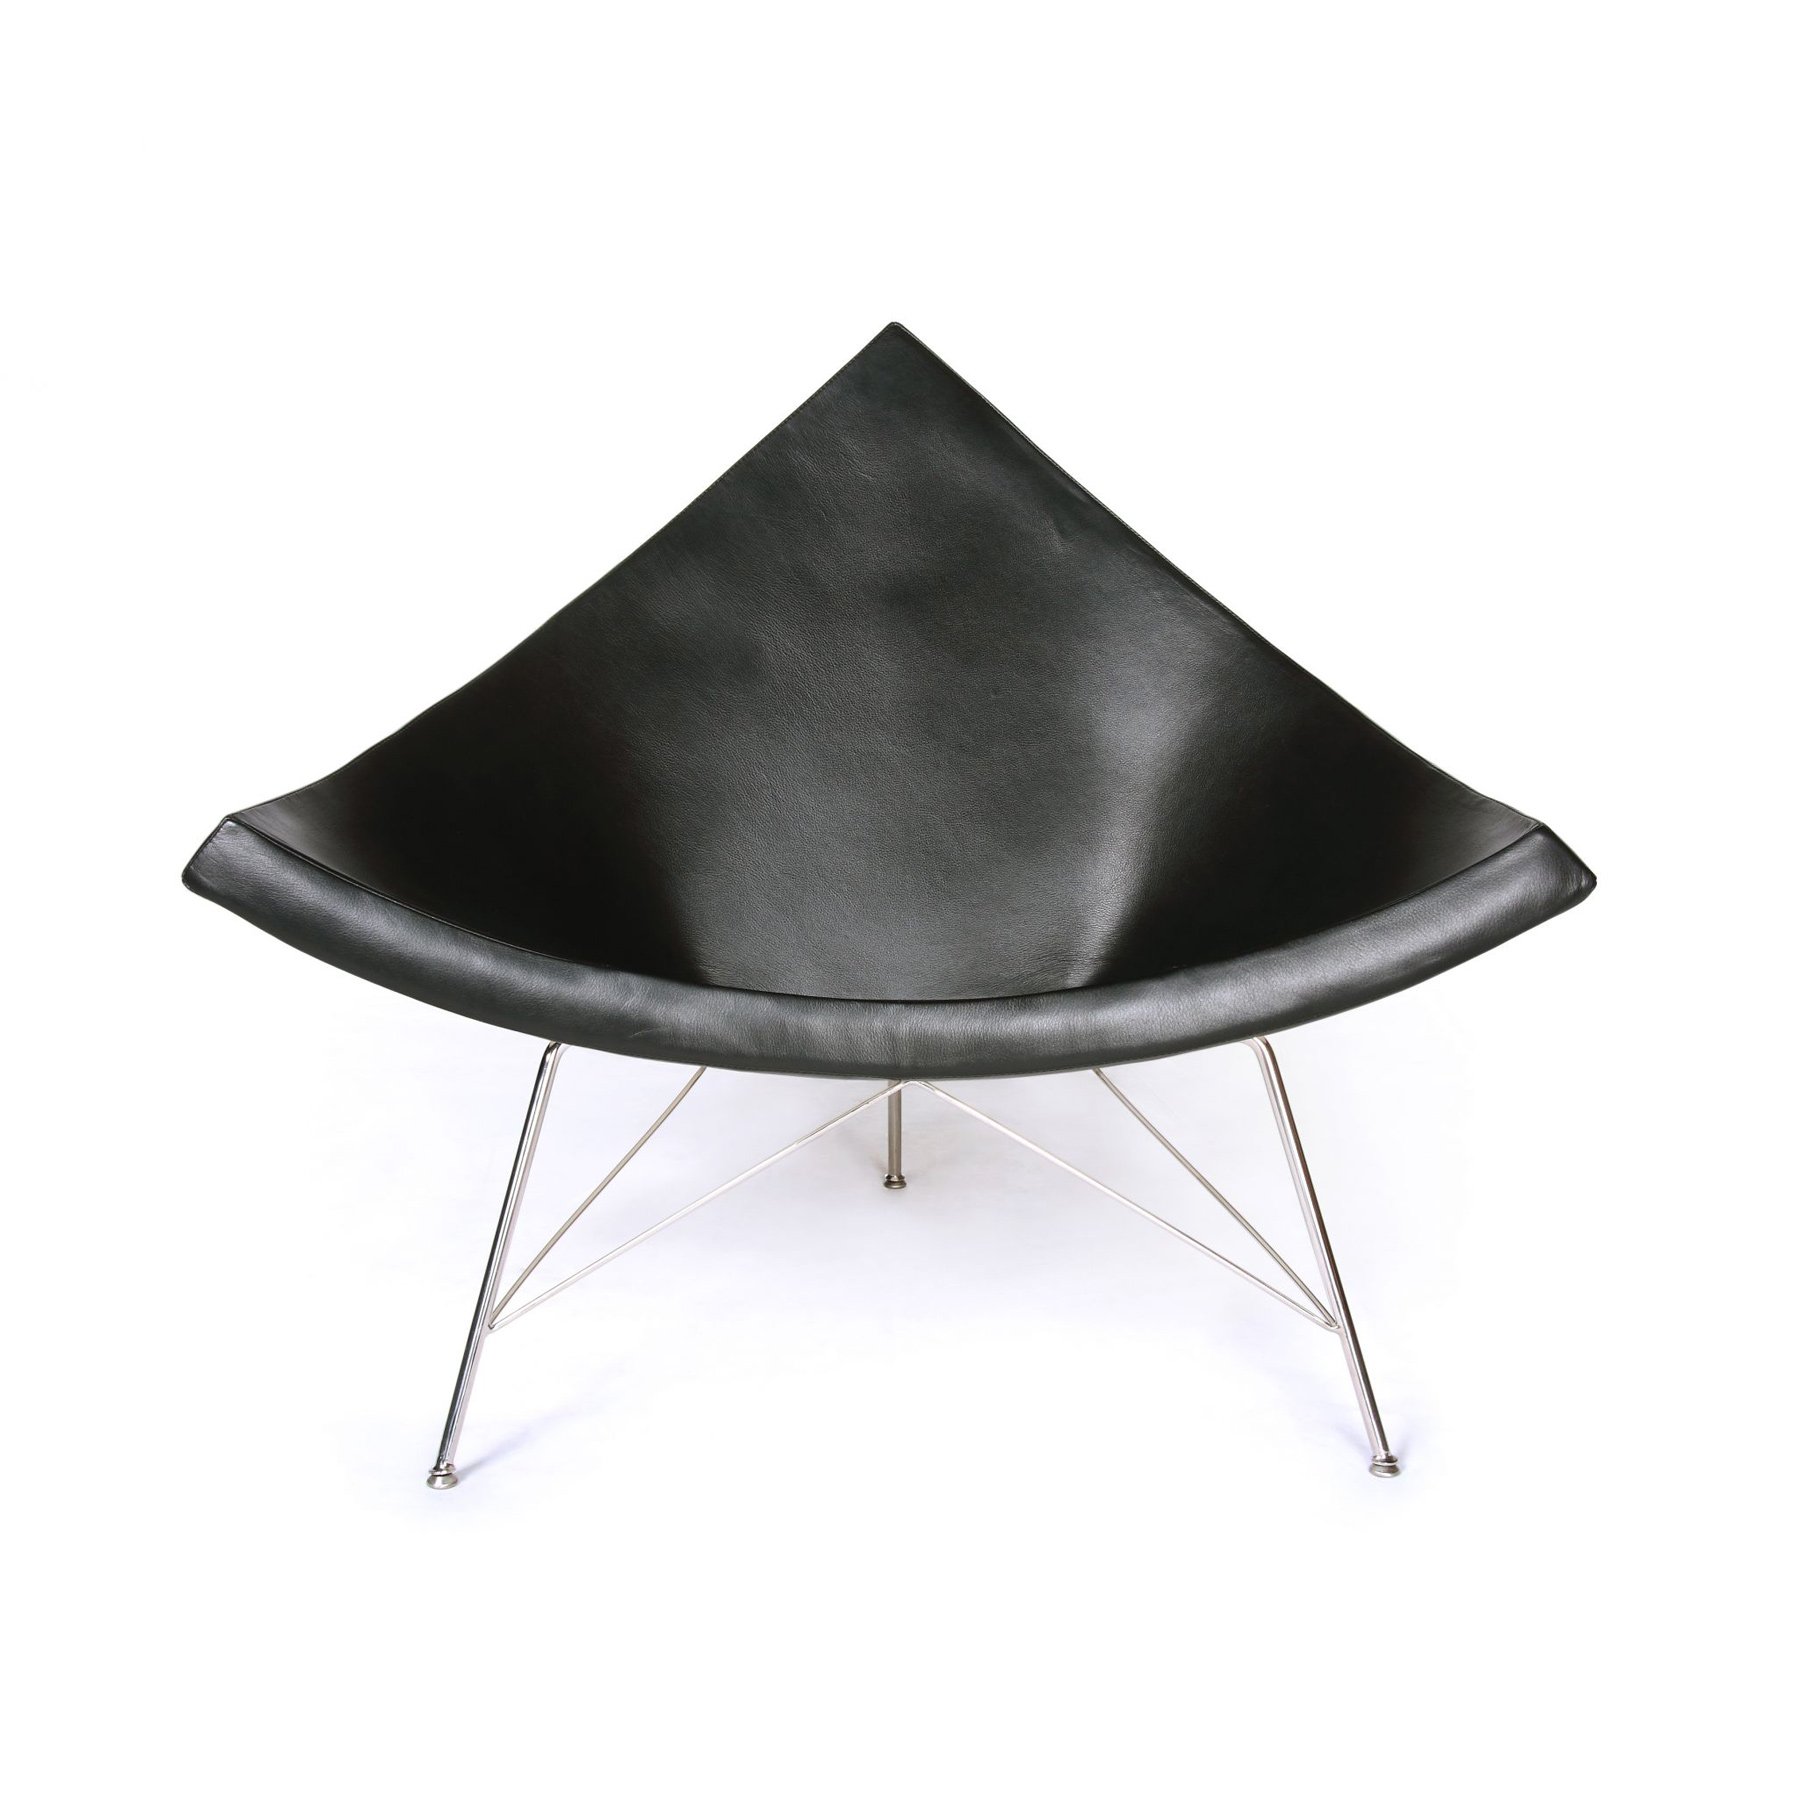 nelson-style coconut chair - leather